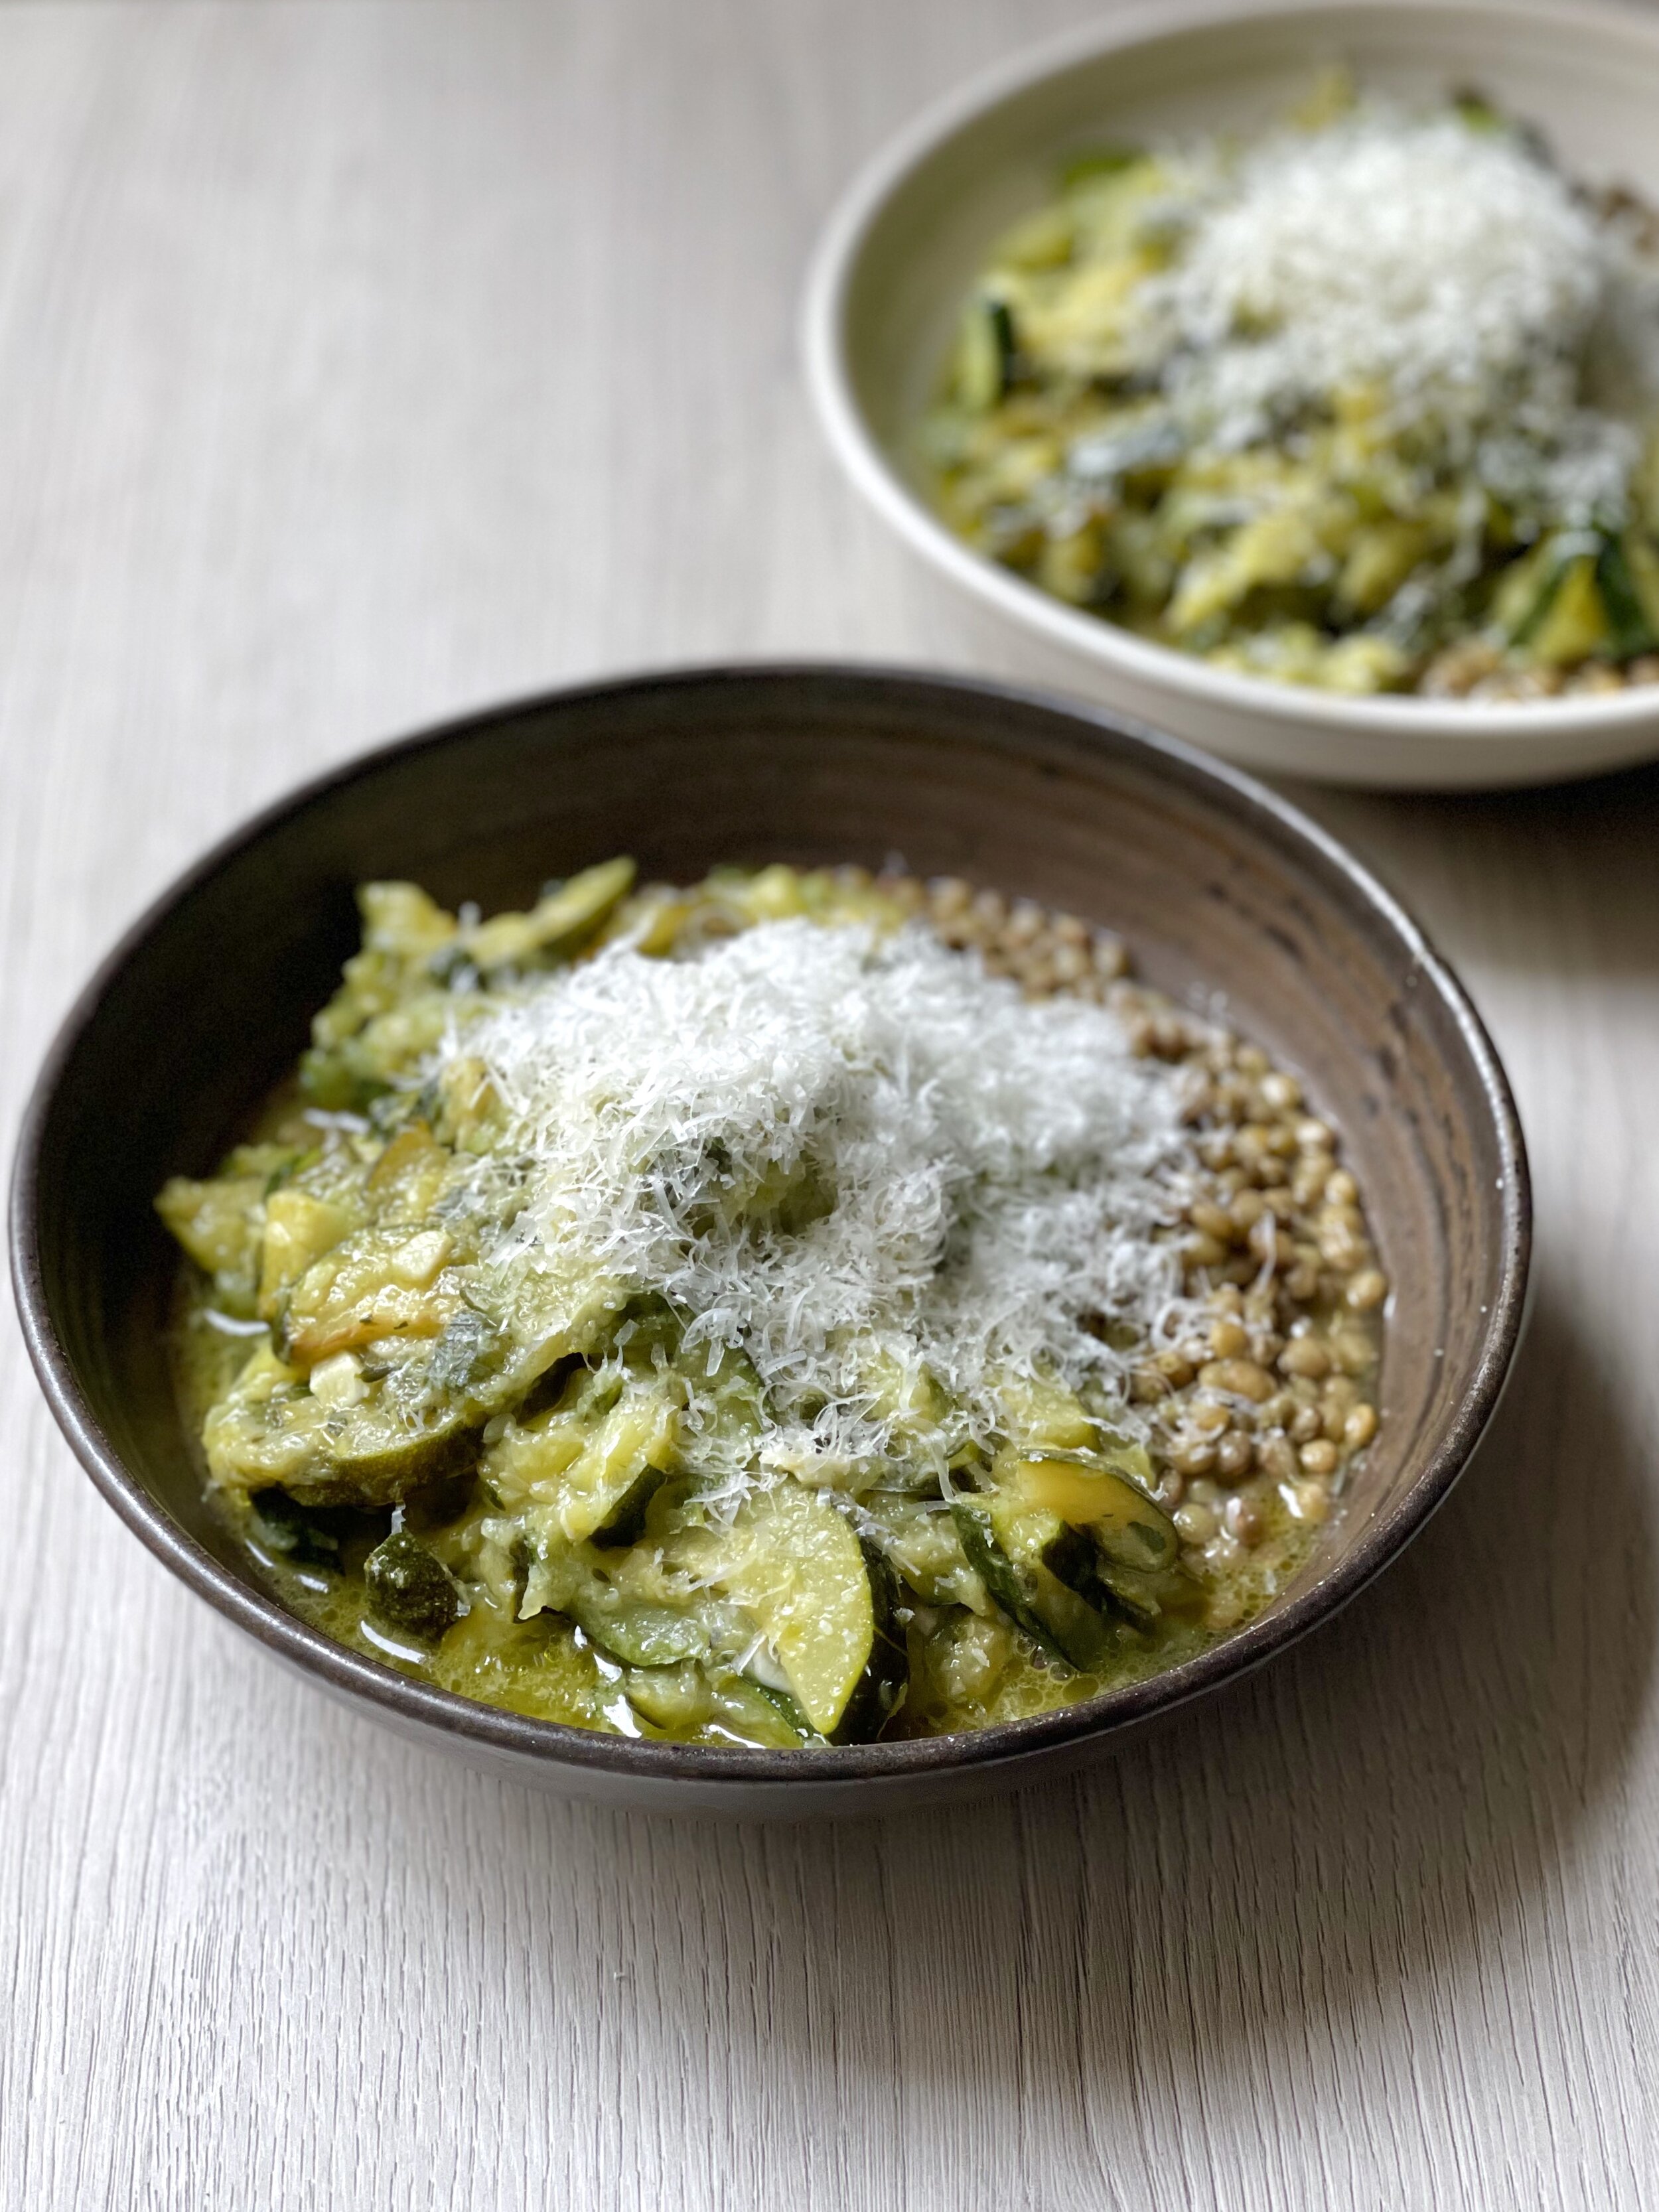 Slow-cooked courgettes with parmesan